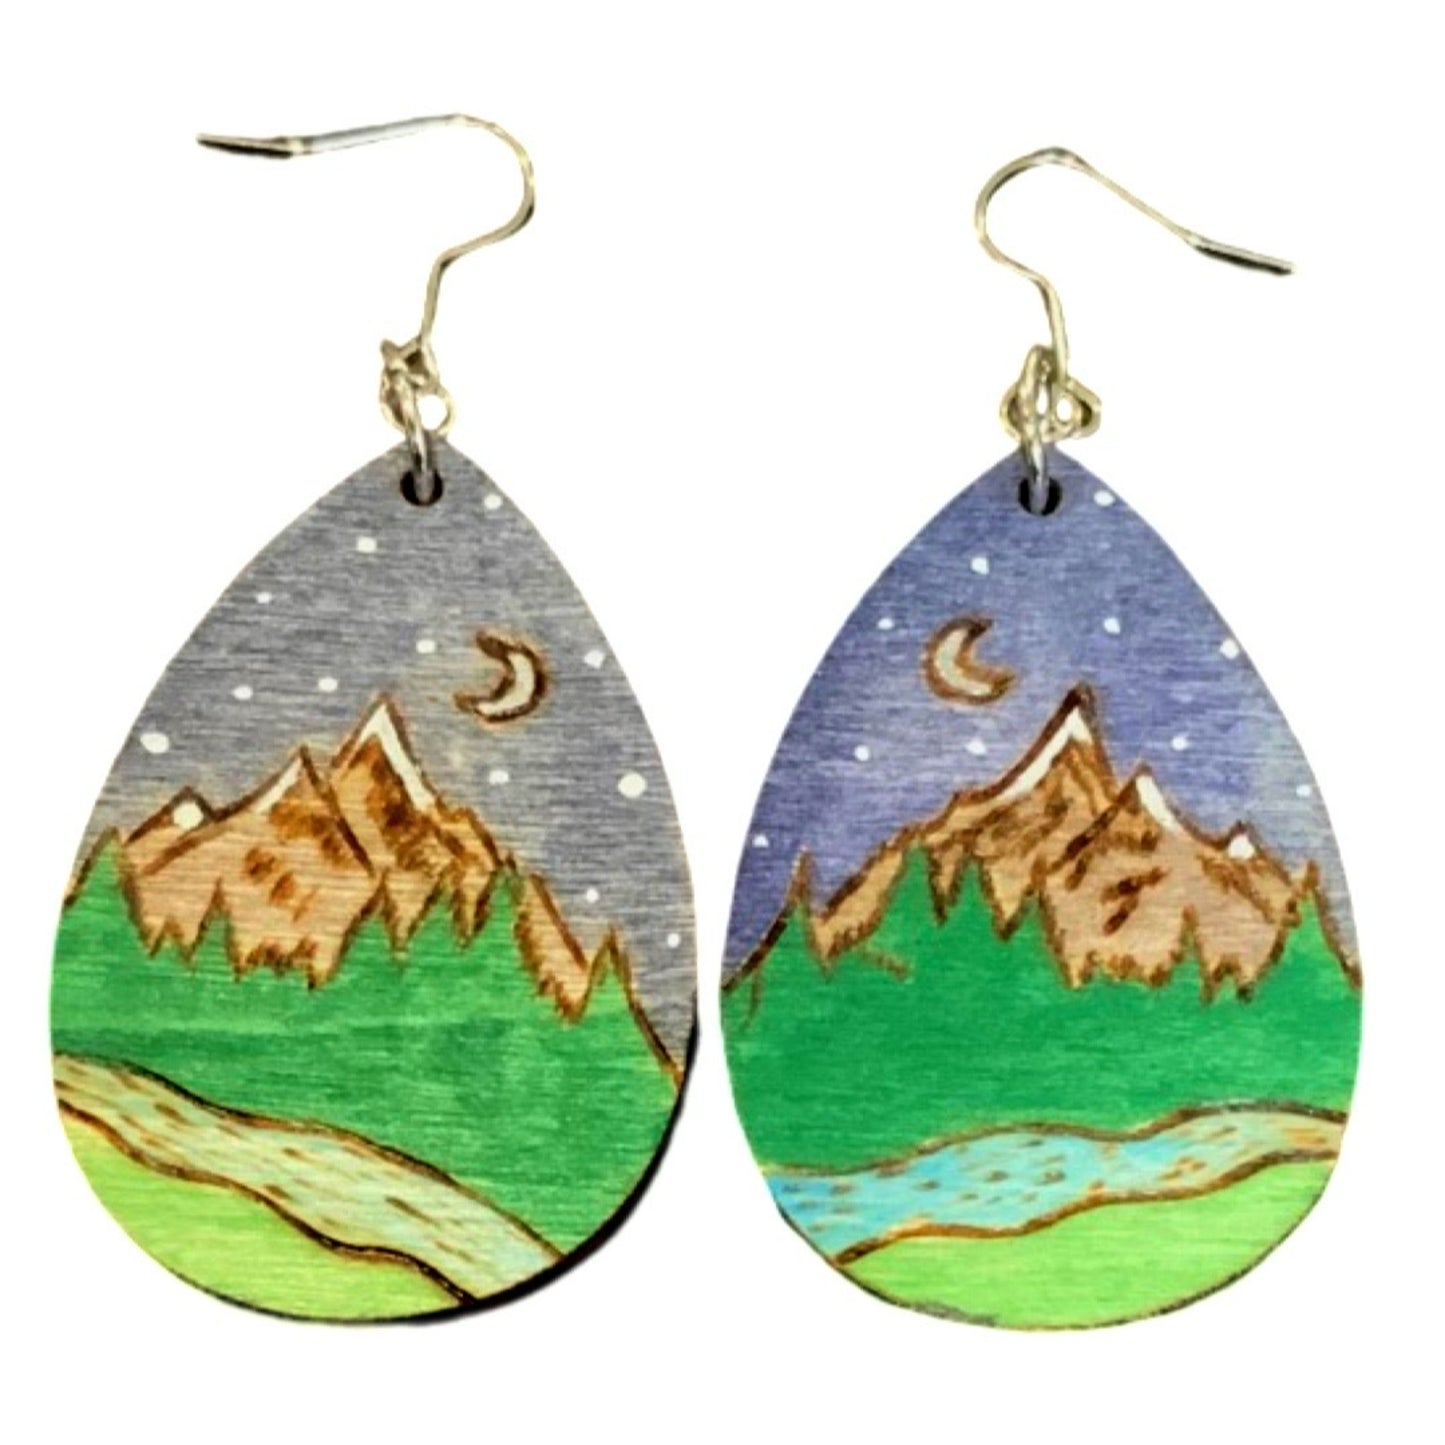 Mountains PNW Earrings Handmade Wood Burned and painted Fashion Light Weight Teardrop